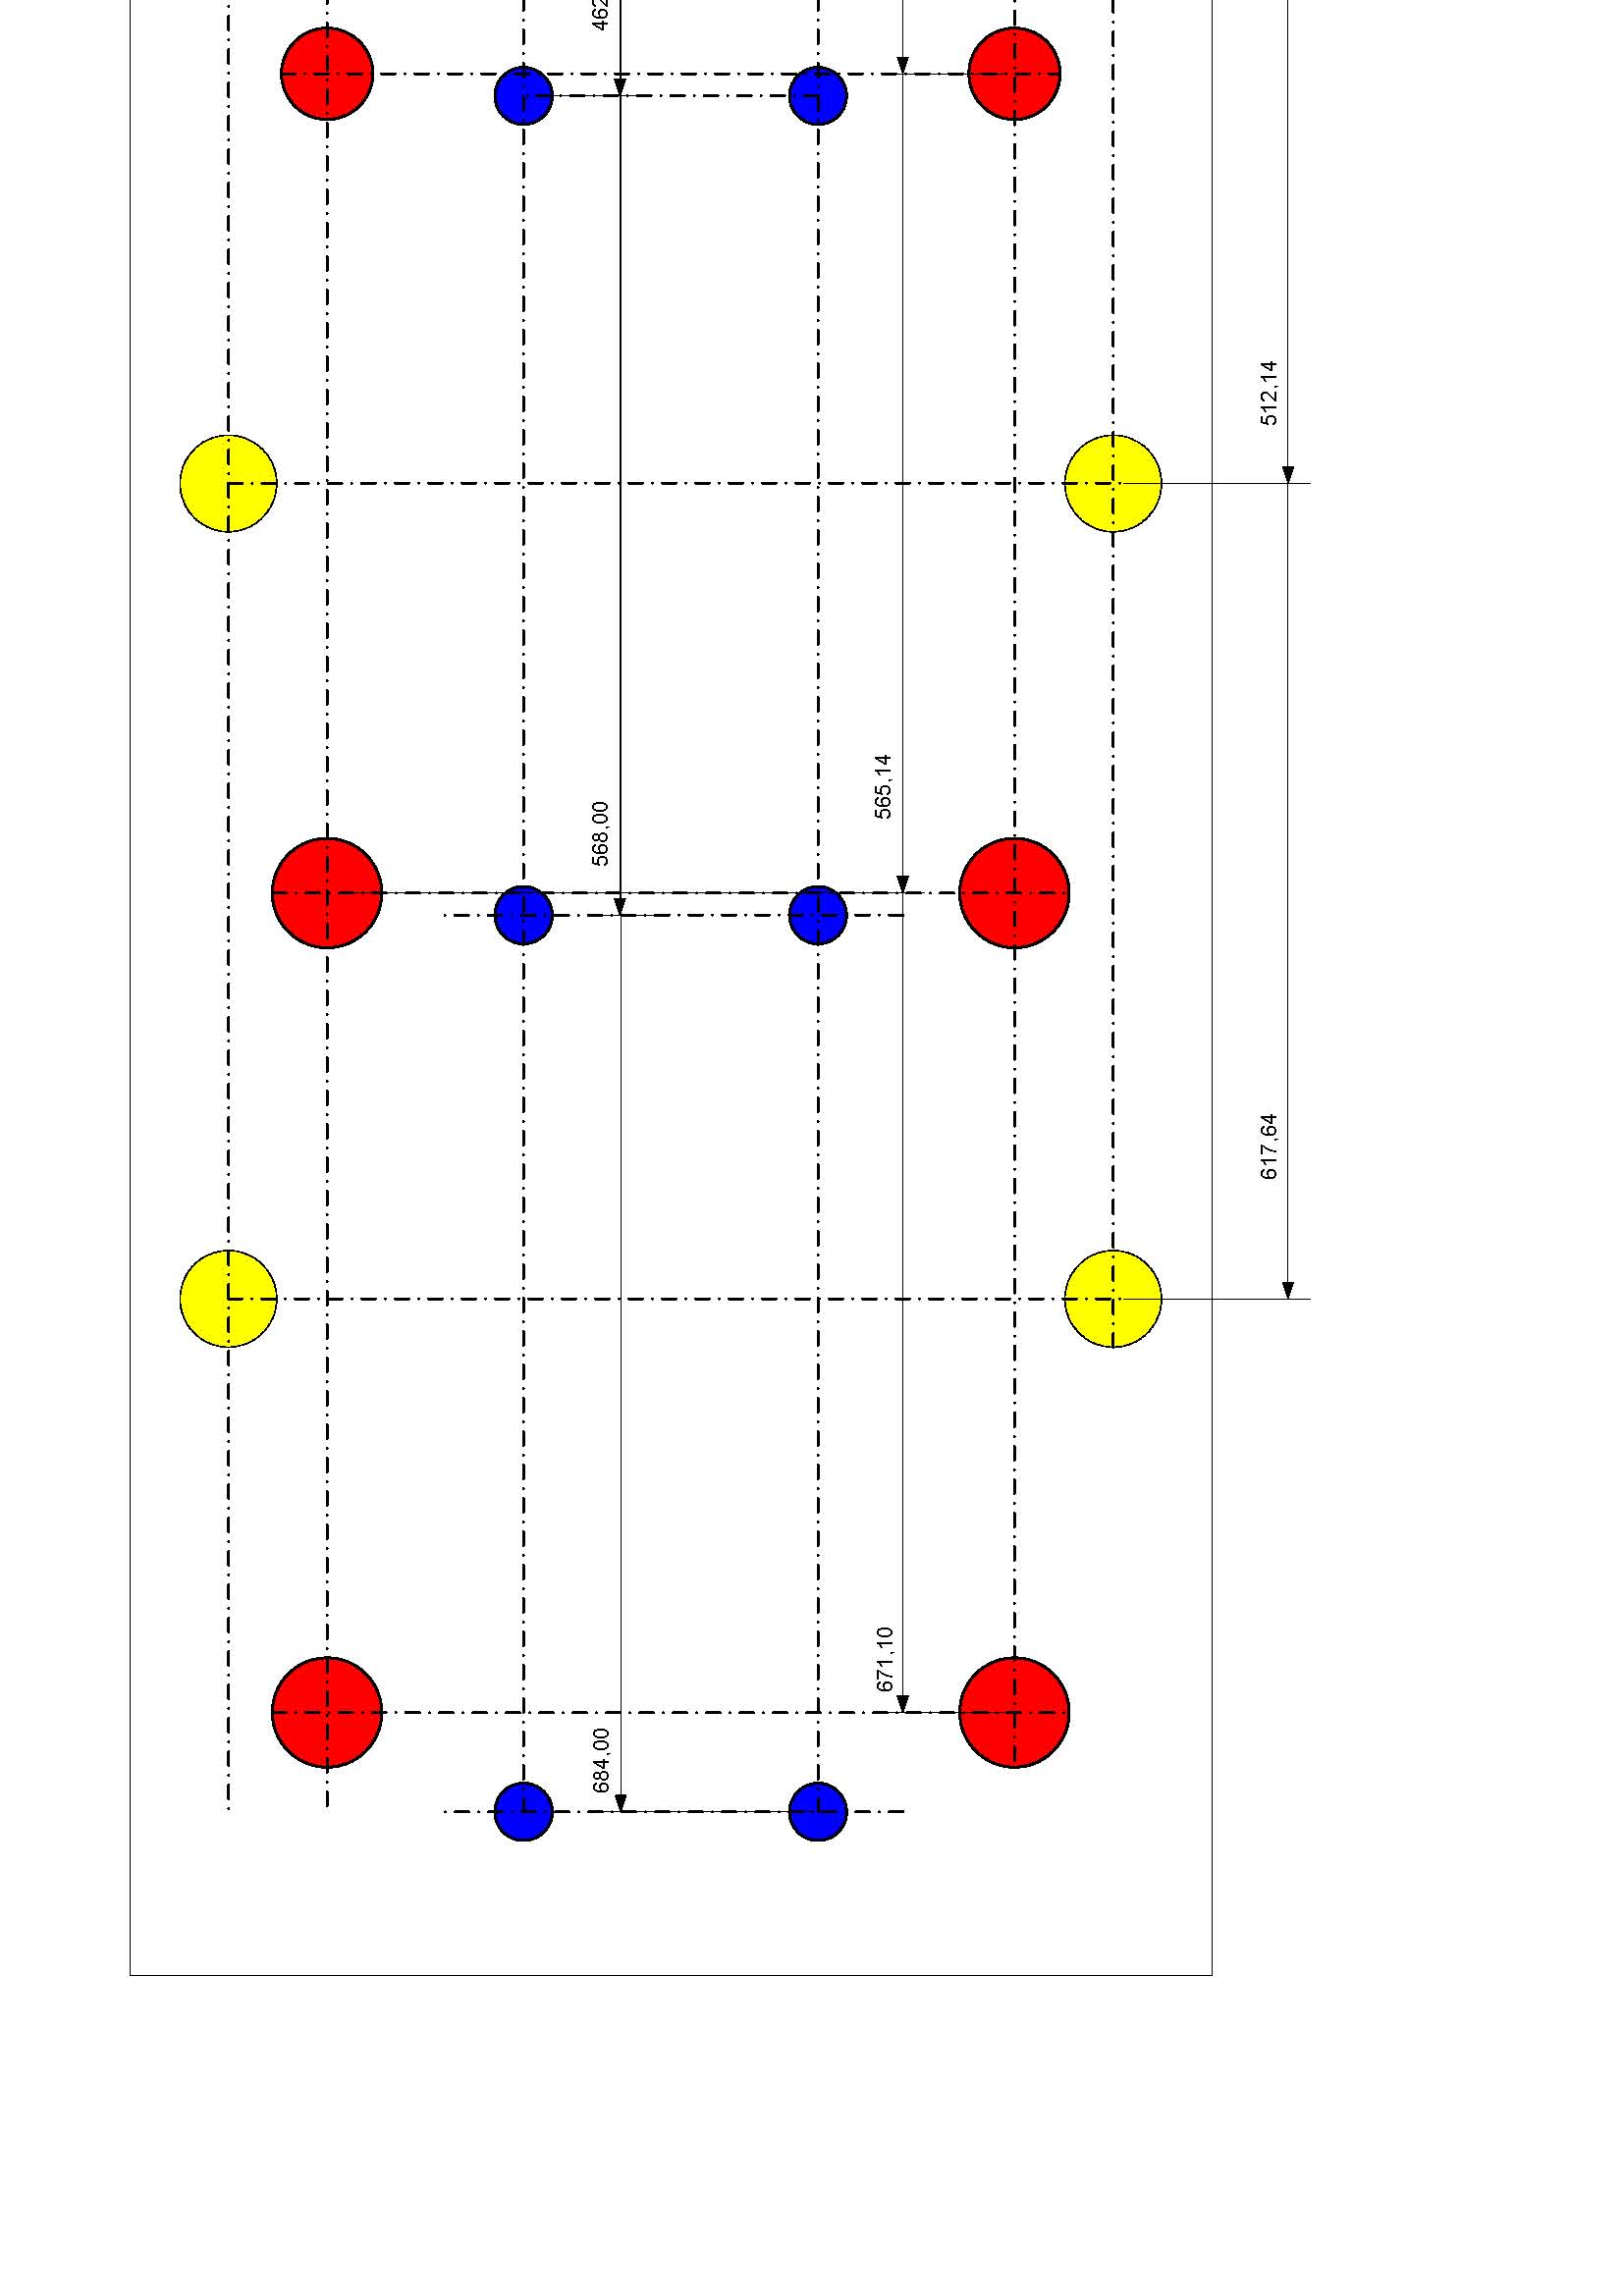 Visio-head pullers v4 shared_Page_3.jpg